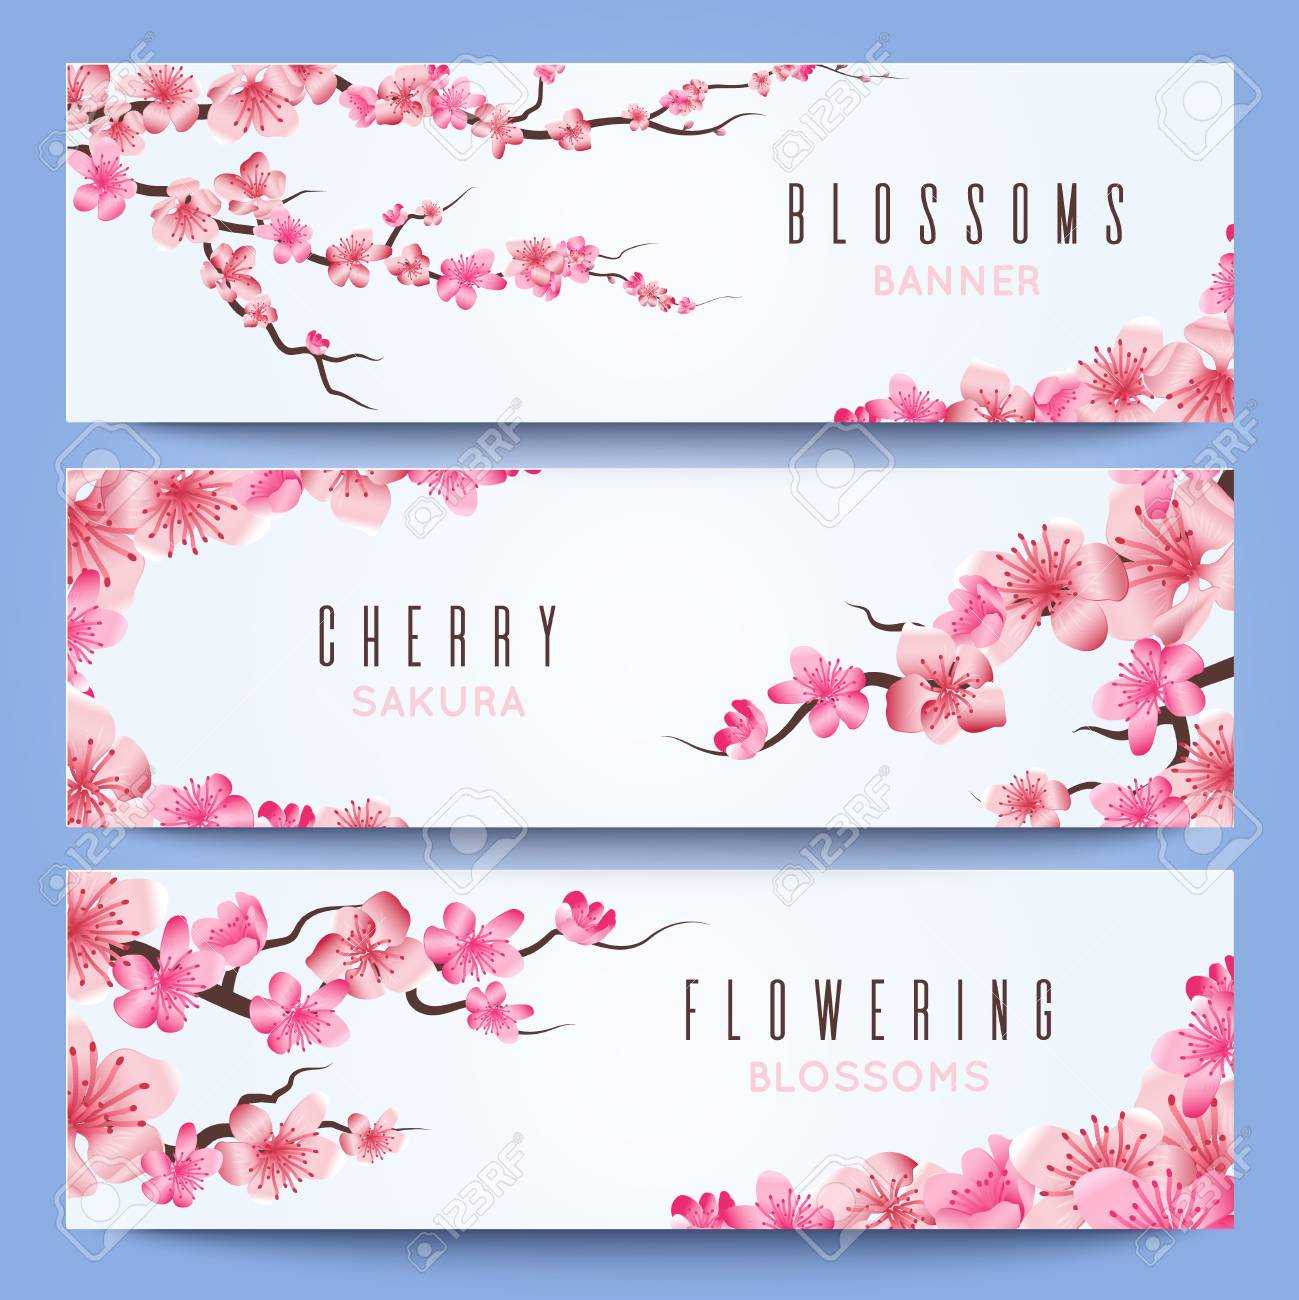 Wedding Banners Template With Spring Japan Sakura, Cherry Blossom Throughout Wedding Banner Design Templates